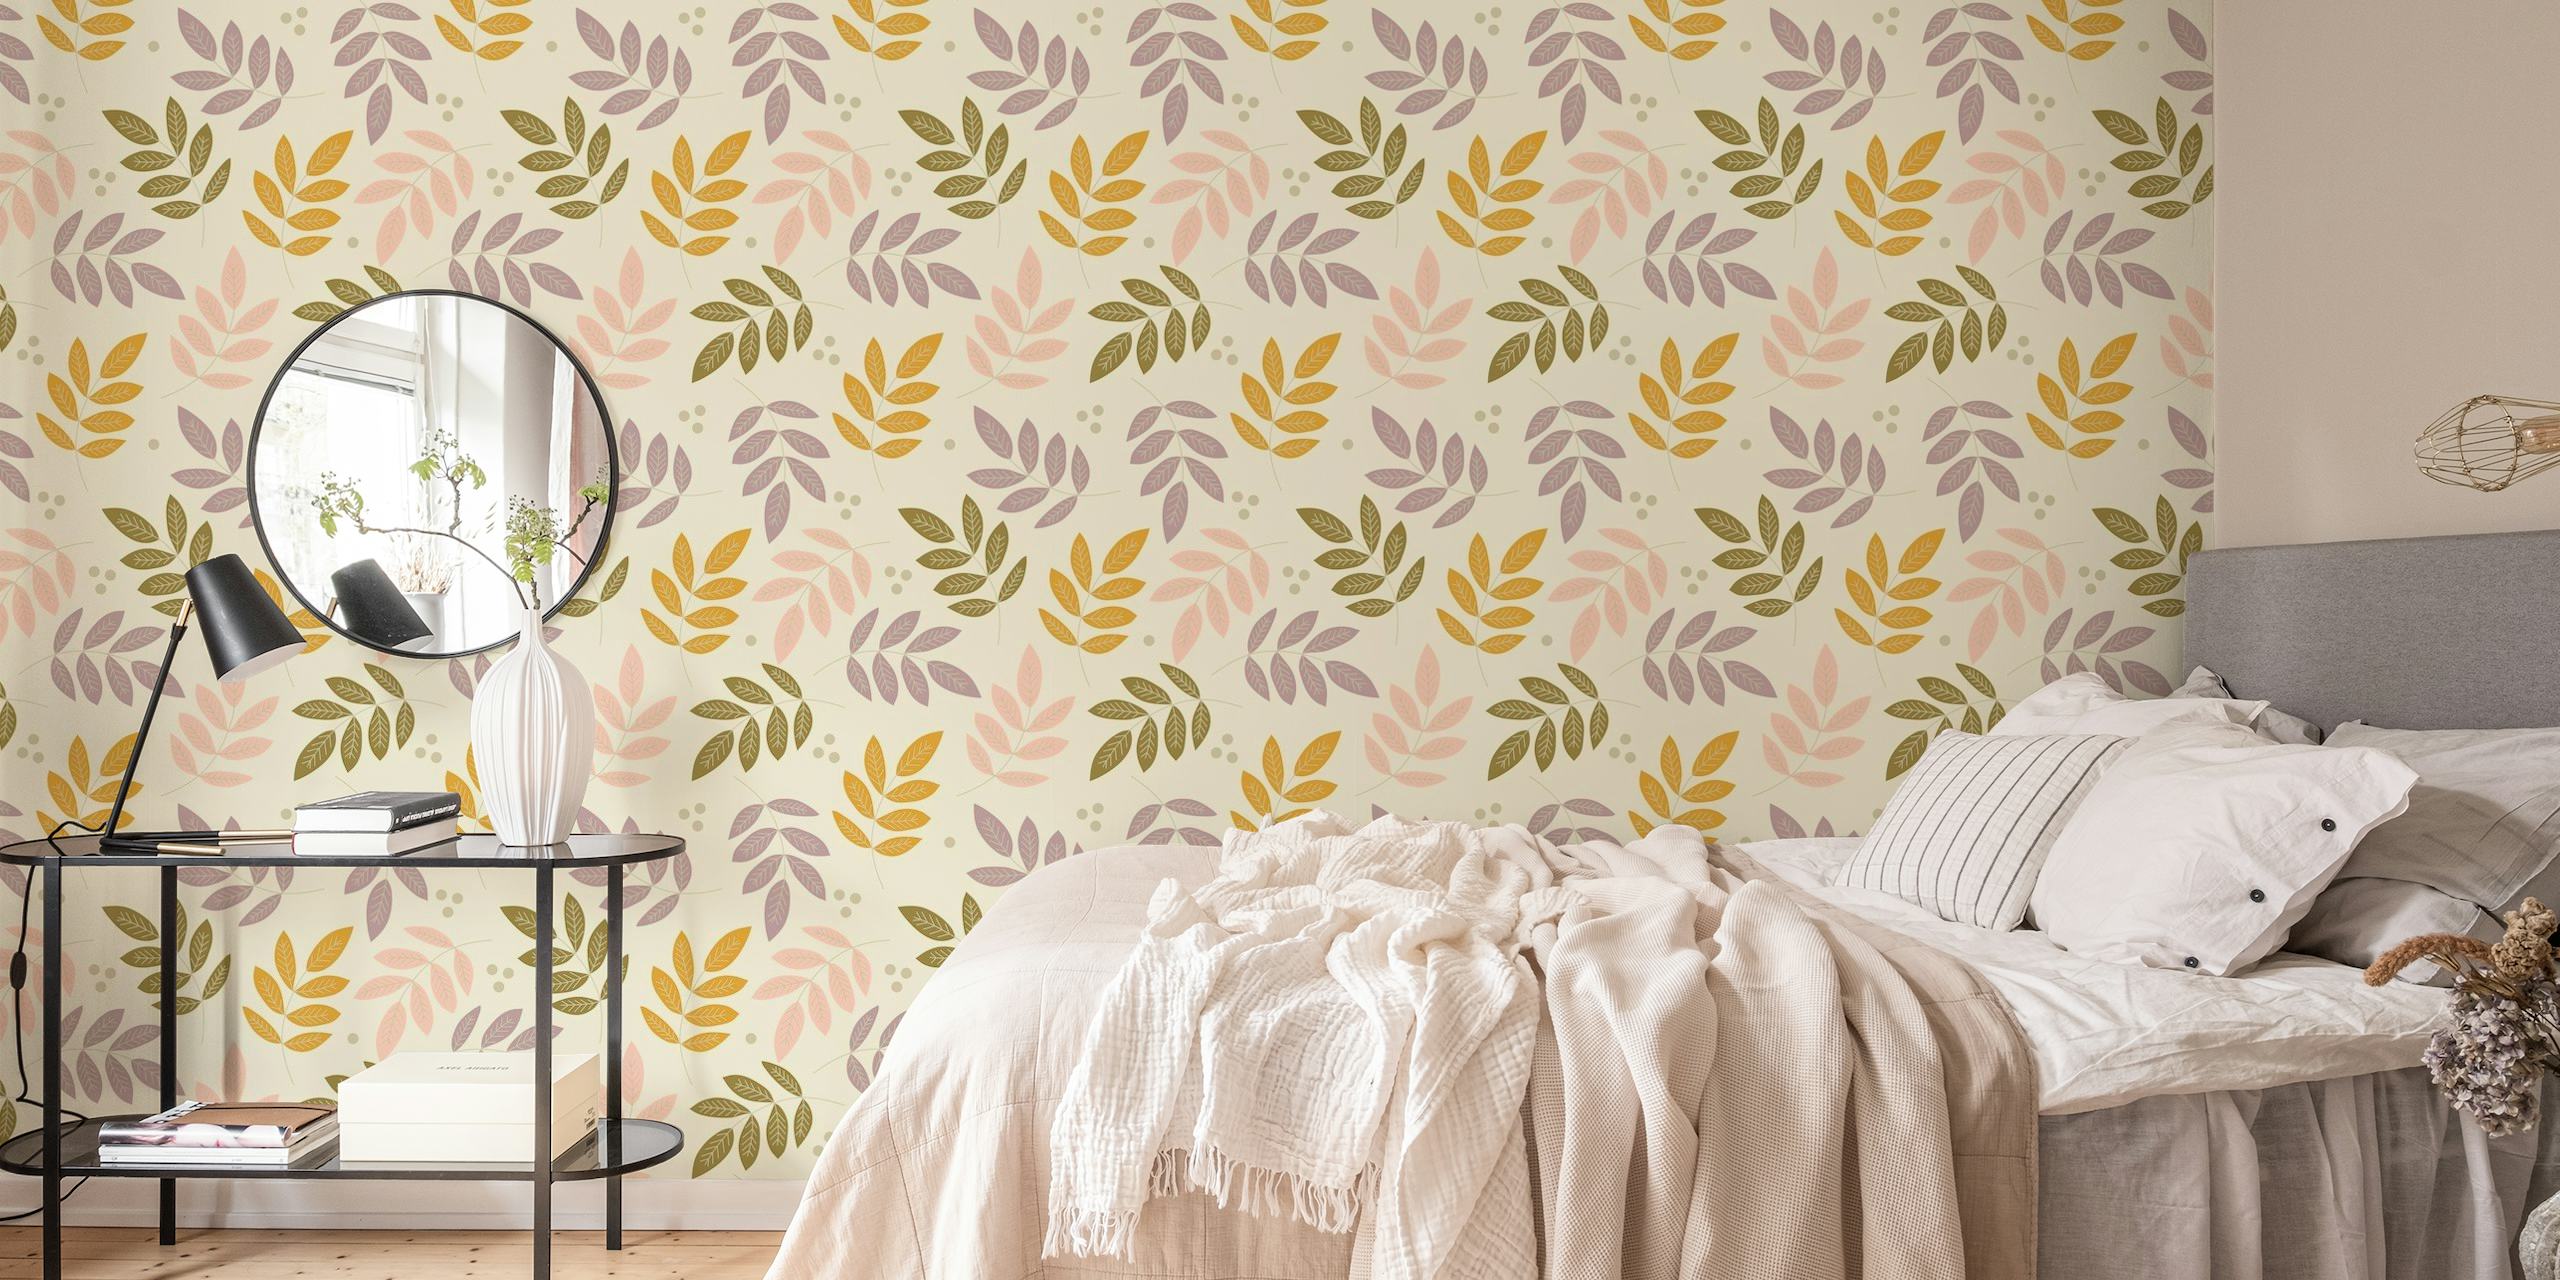 Falling Leaves wall mural with gold, green, and purple leaves on a blush background